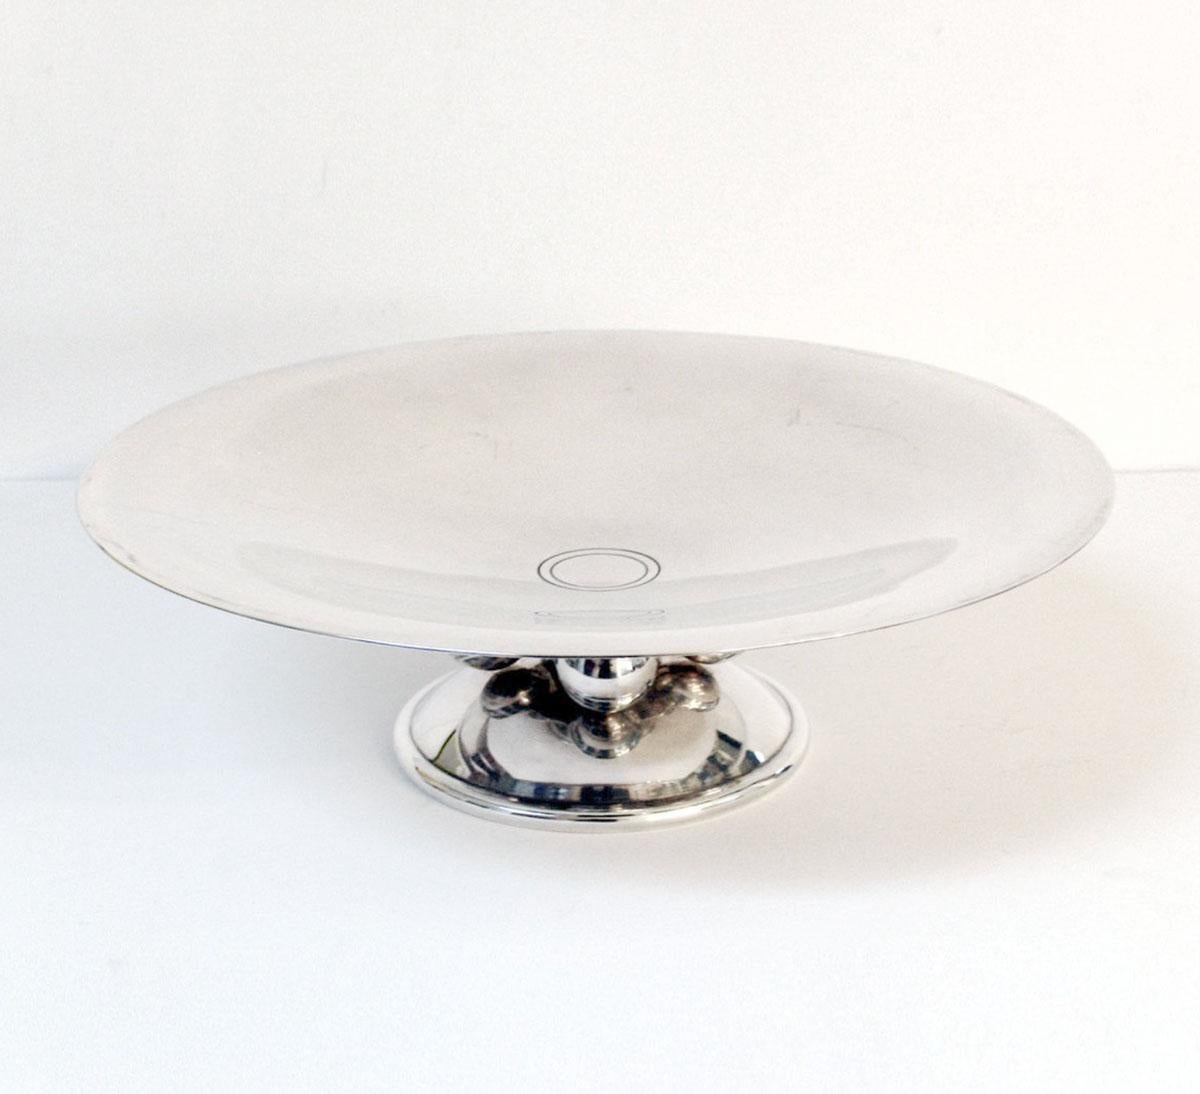 Iconic large Art Deco style fruit bowl or centerpiece created by for the famous silversmith Christofle for the 'Normandie' ocean liner. Circular shape with a round base decorated with four spheres. 
Piece stamped beneath with Christophe hallmarks